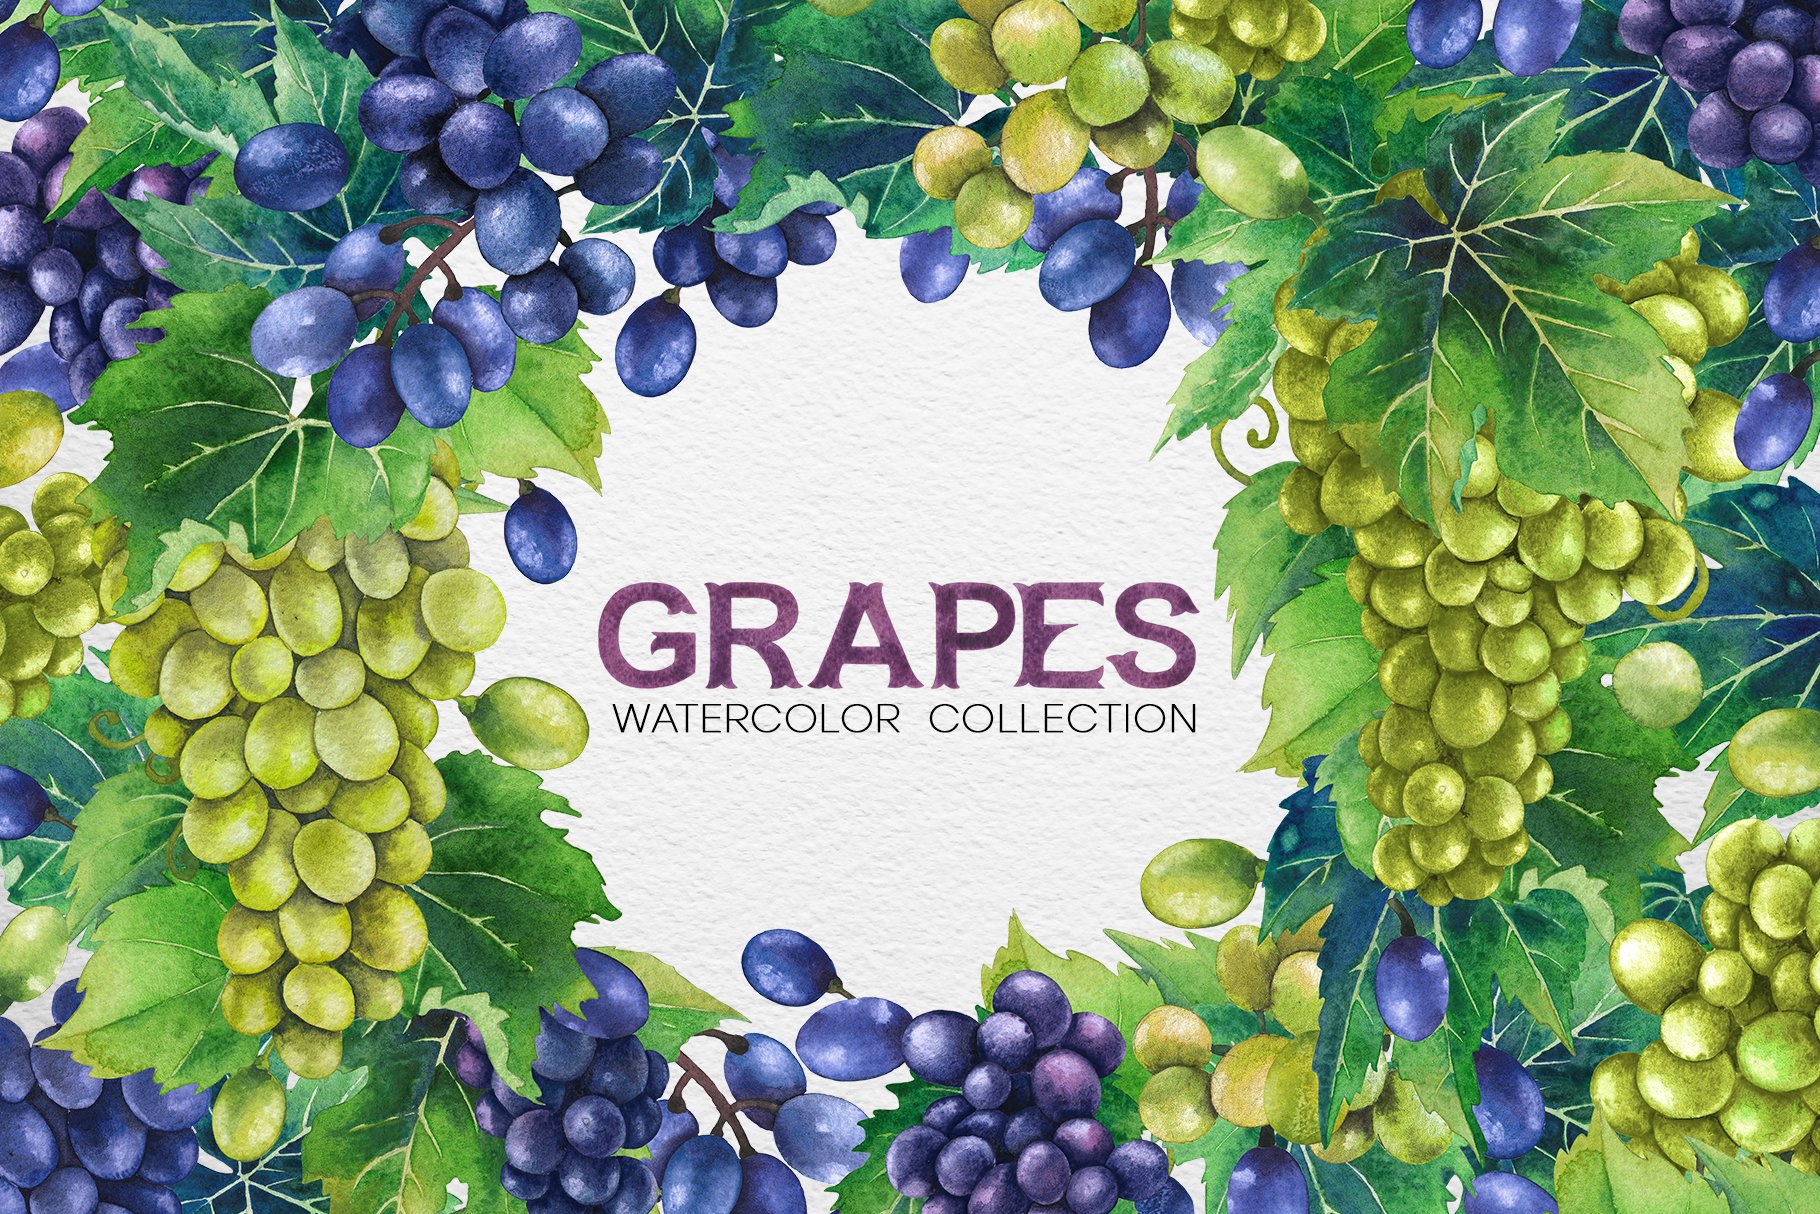 Watercolor Grapes cover image.